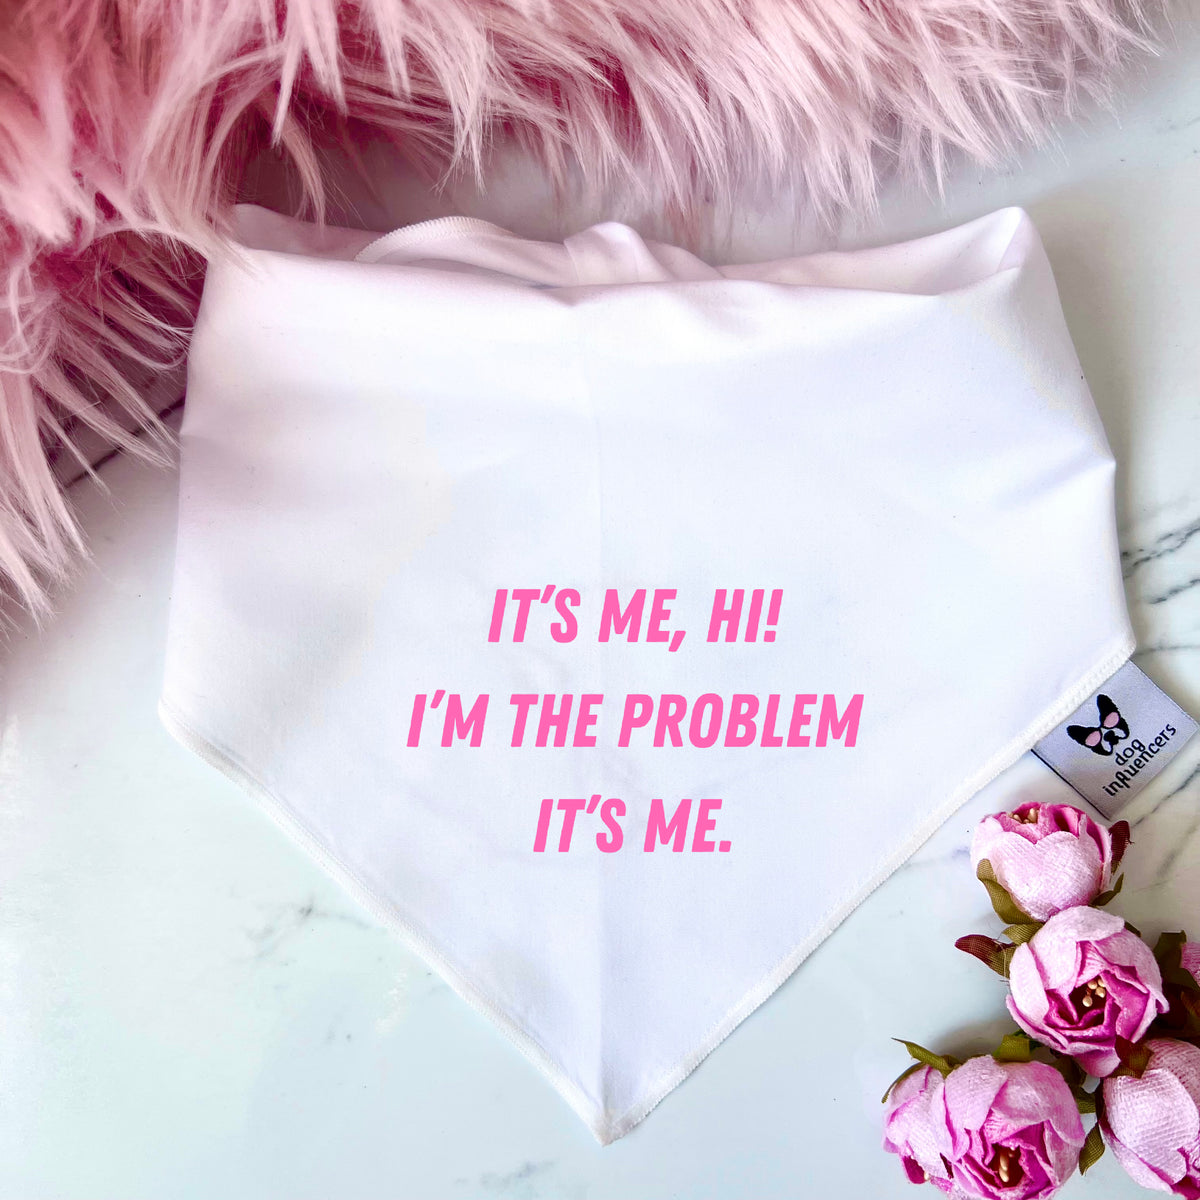 Taylor Swift Dog Bandana - "It's me the problem, it's me" - Inpired by the song Anti-Hero